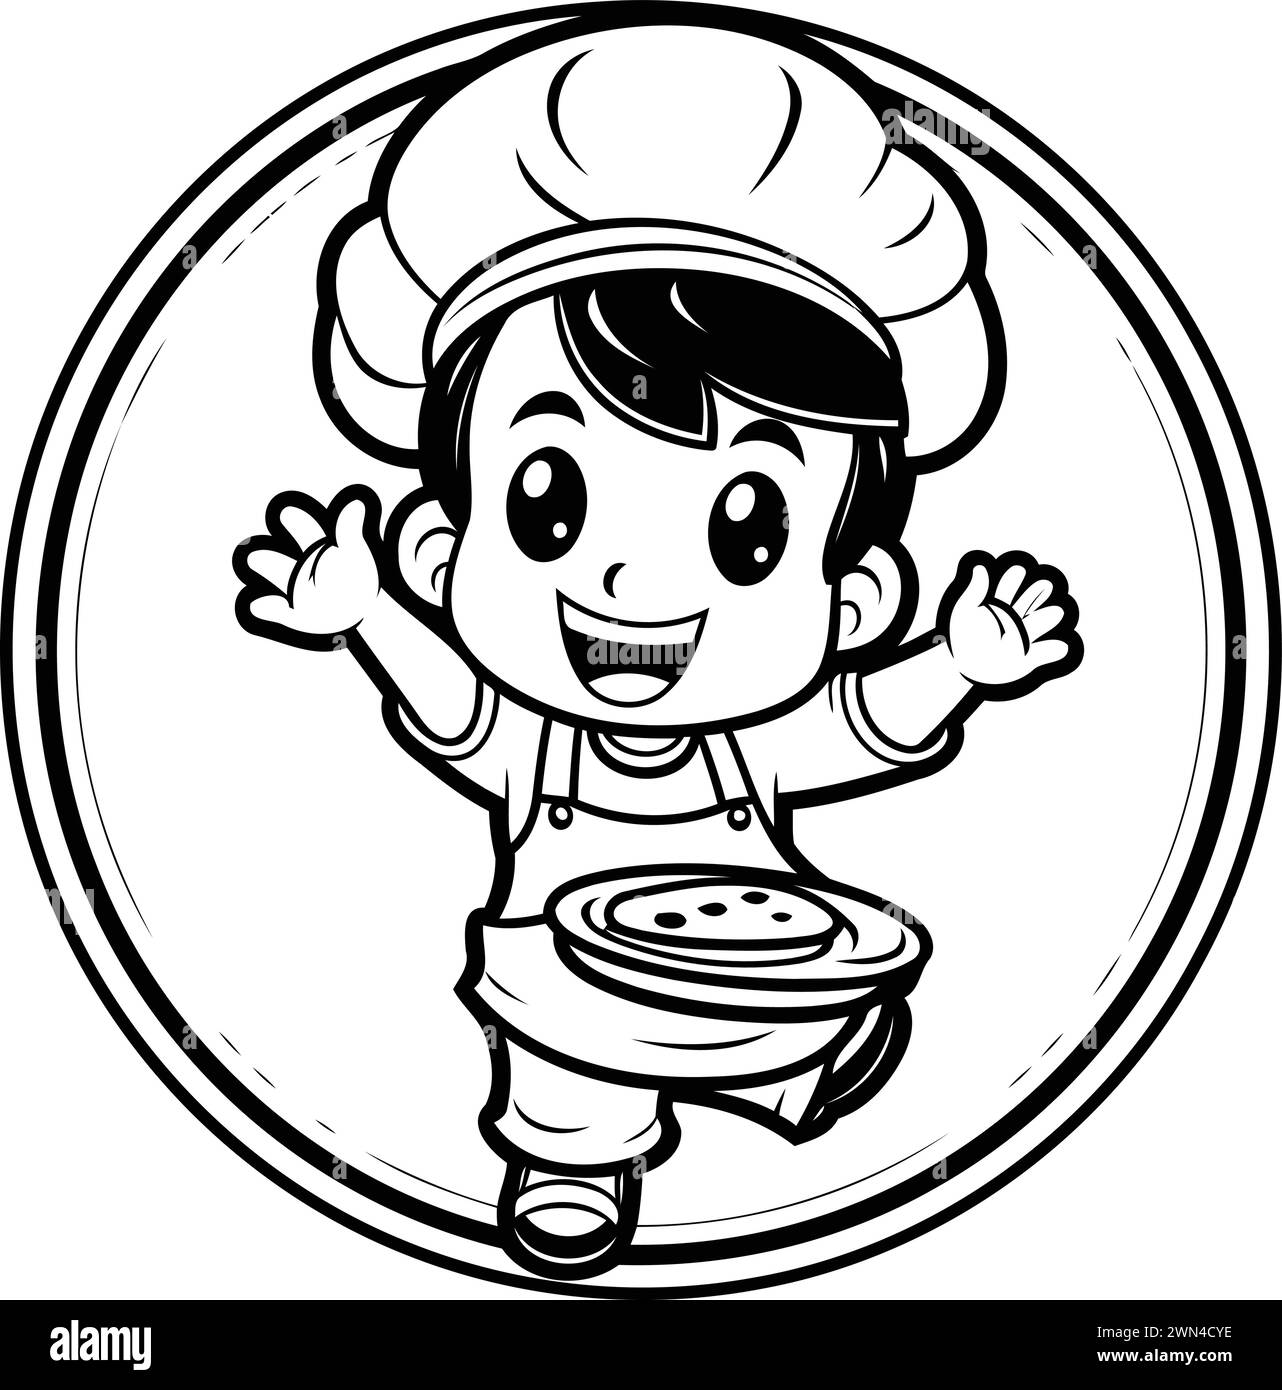 Black and White Cartoon Illustration of Cute Little Boy Chef with Pancake for Coloring Book Stock Vector